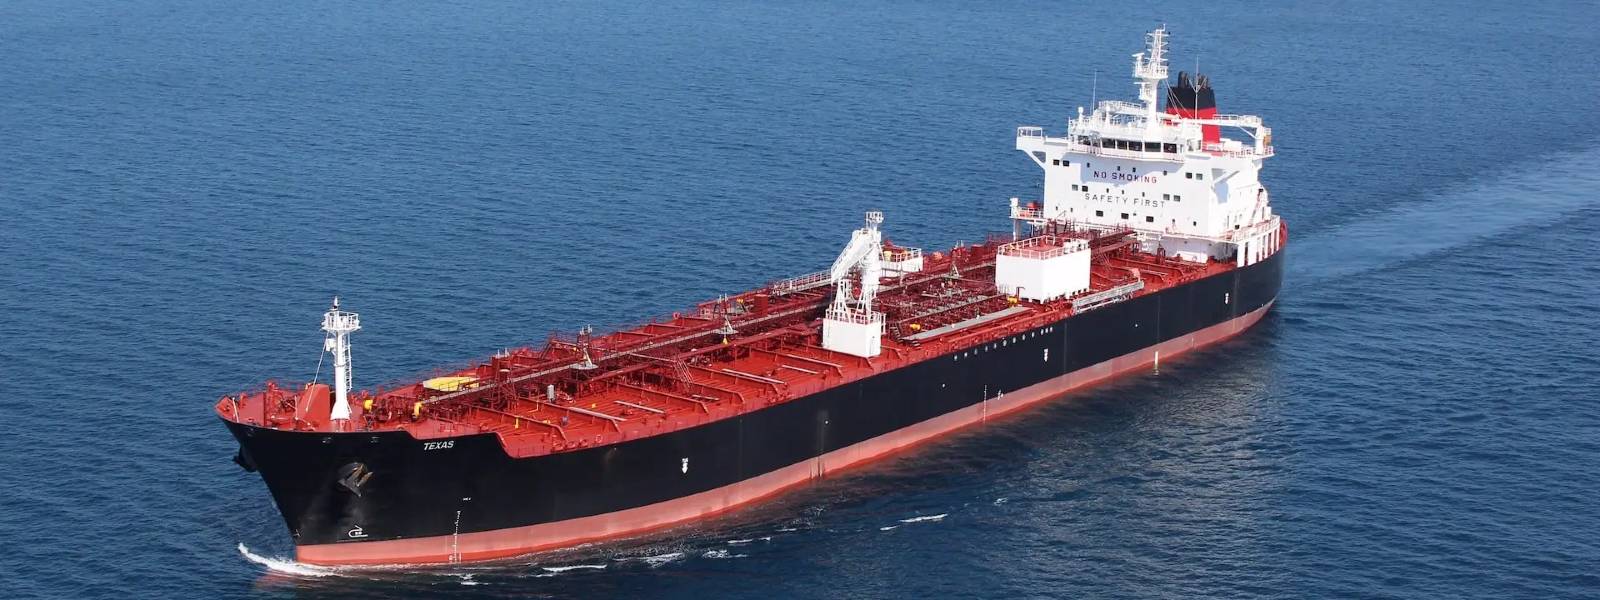 Ship carrying 37,500MT petrol arrives at Colombo Port